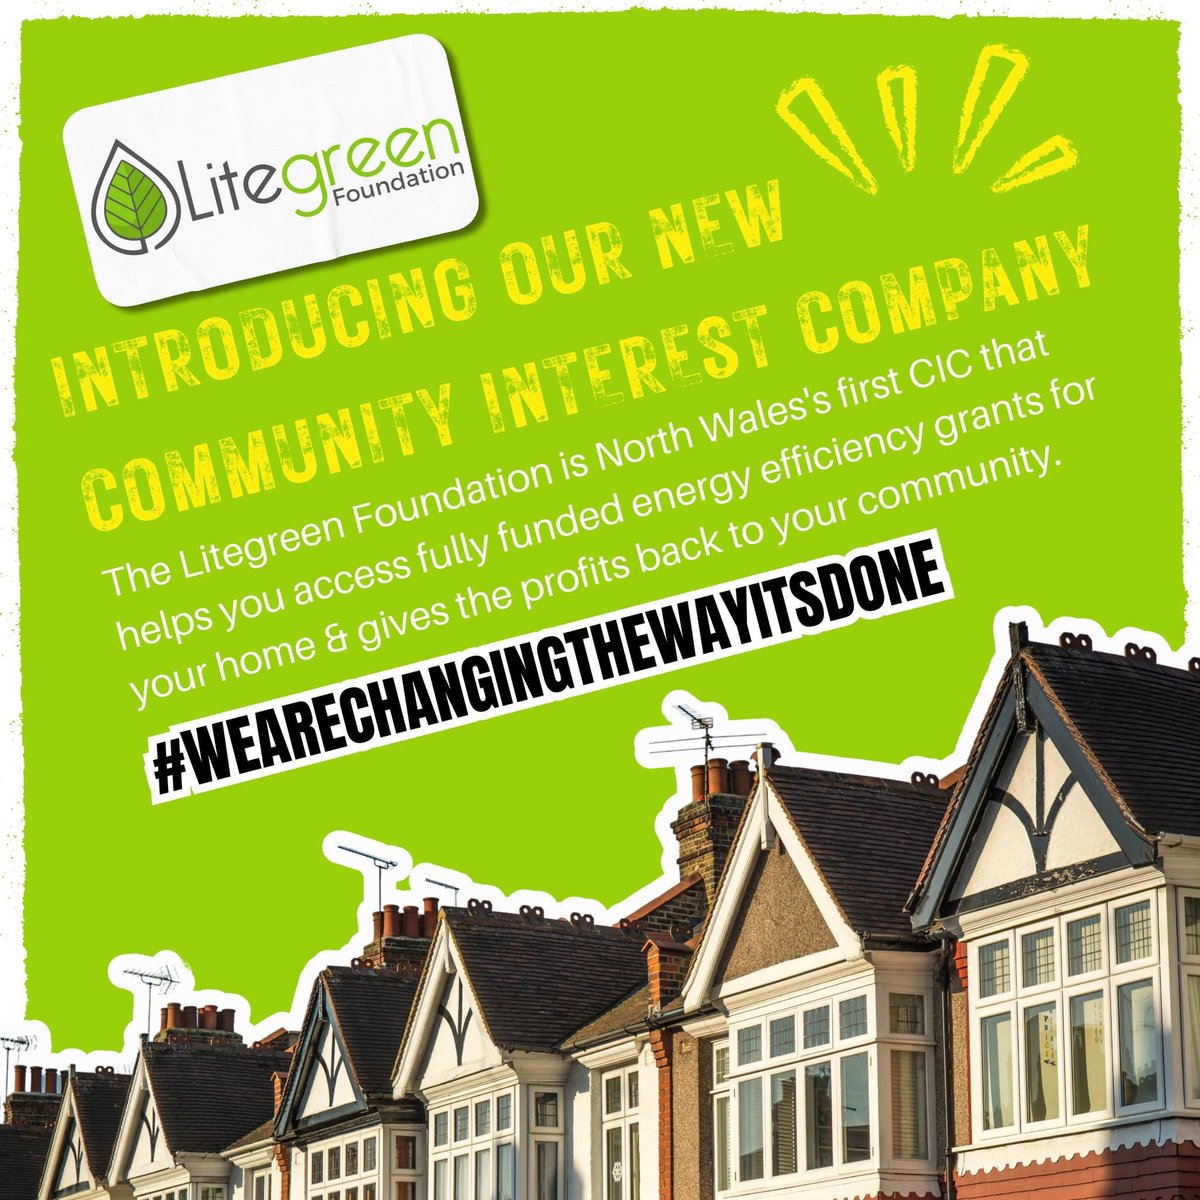 #NWalesHour #EnergyEfficiency Access fully funded energy efficiency upgrades for your home donating the profits back to your community?? Get in touch with #Wrexham based @LitegreenCIC for a simple explanation how it works. More info here; litegreenfoundation.org.uk